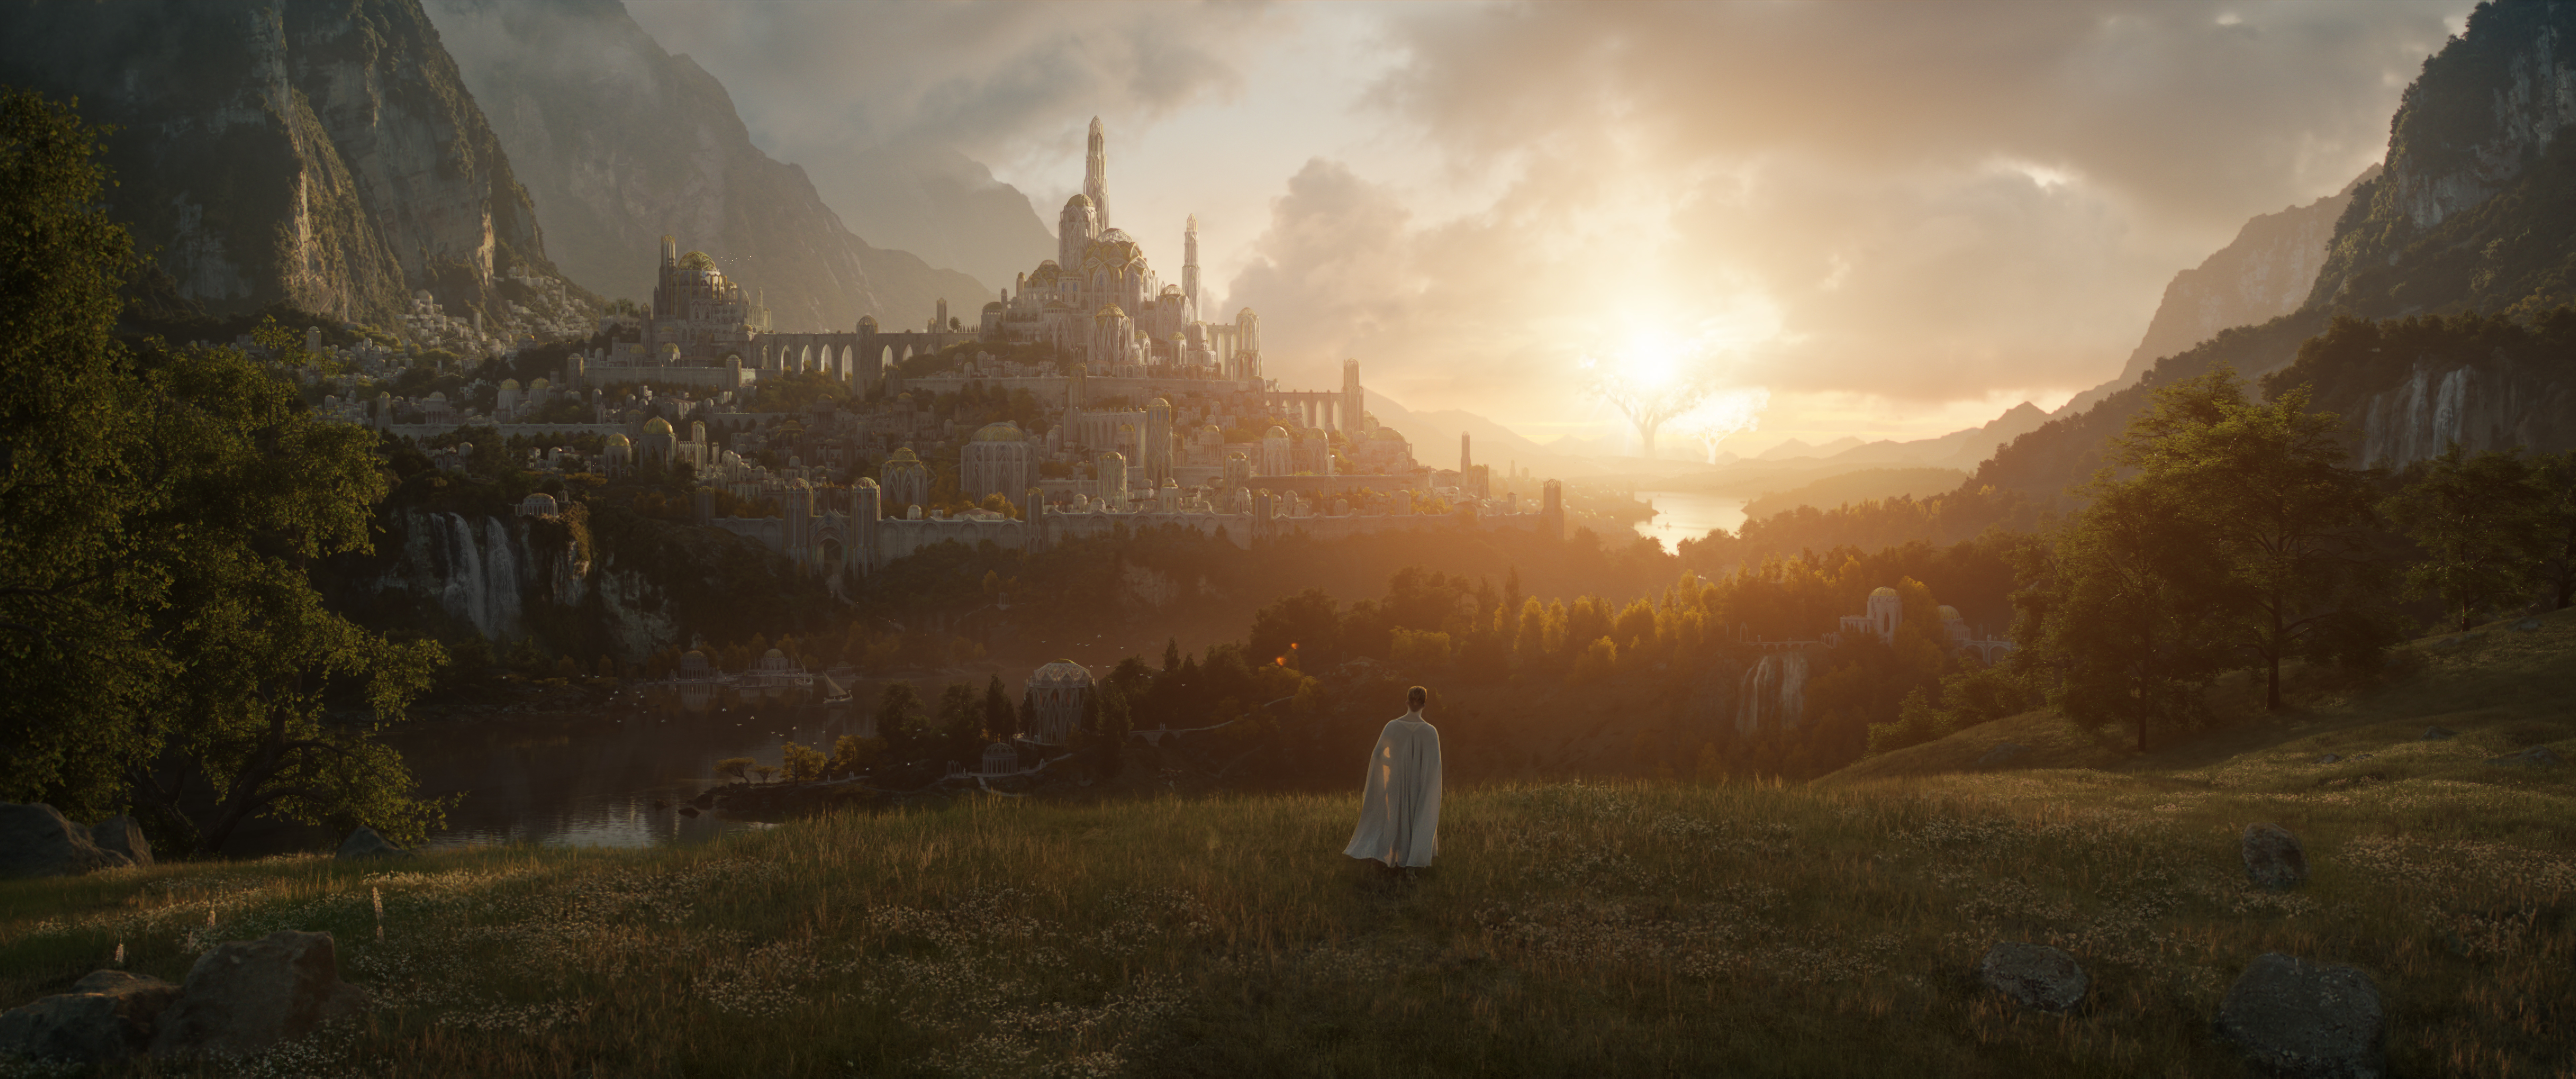 a woman in a white cape stands on a grassy ridge overlooking an elven city in Amazon Studios’ untitled Lord of the Rings TV series